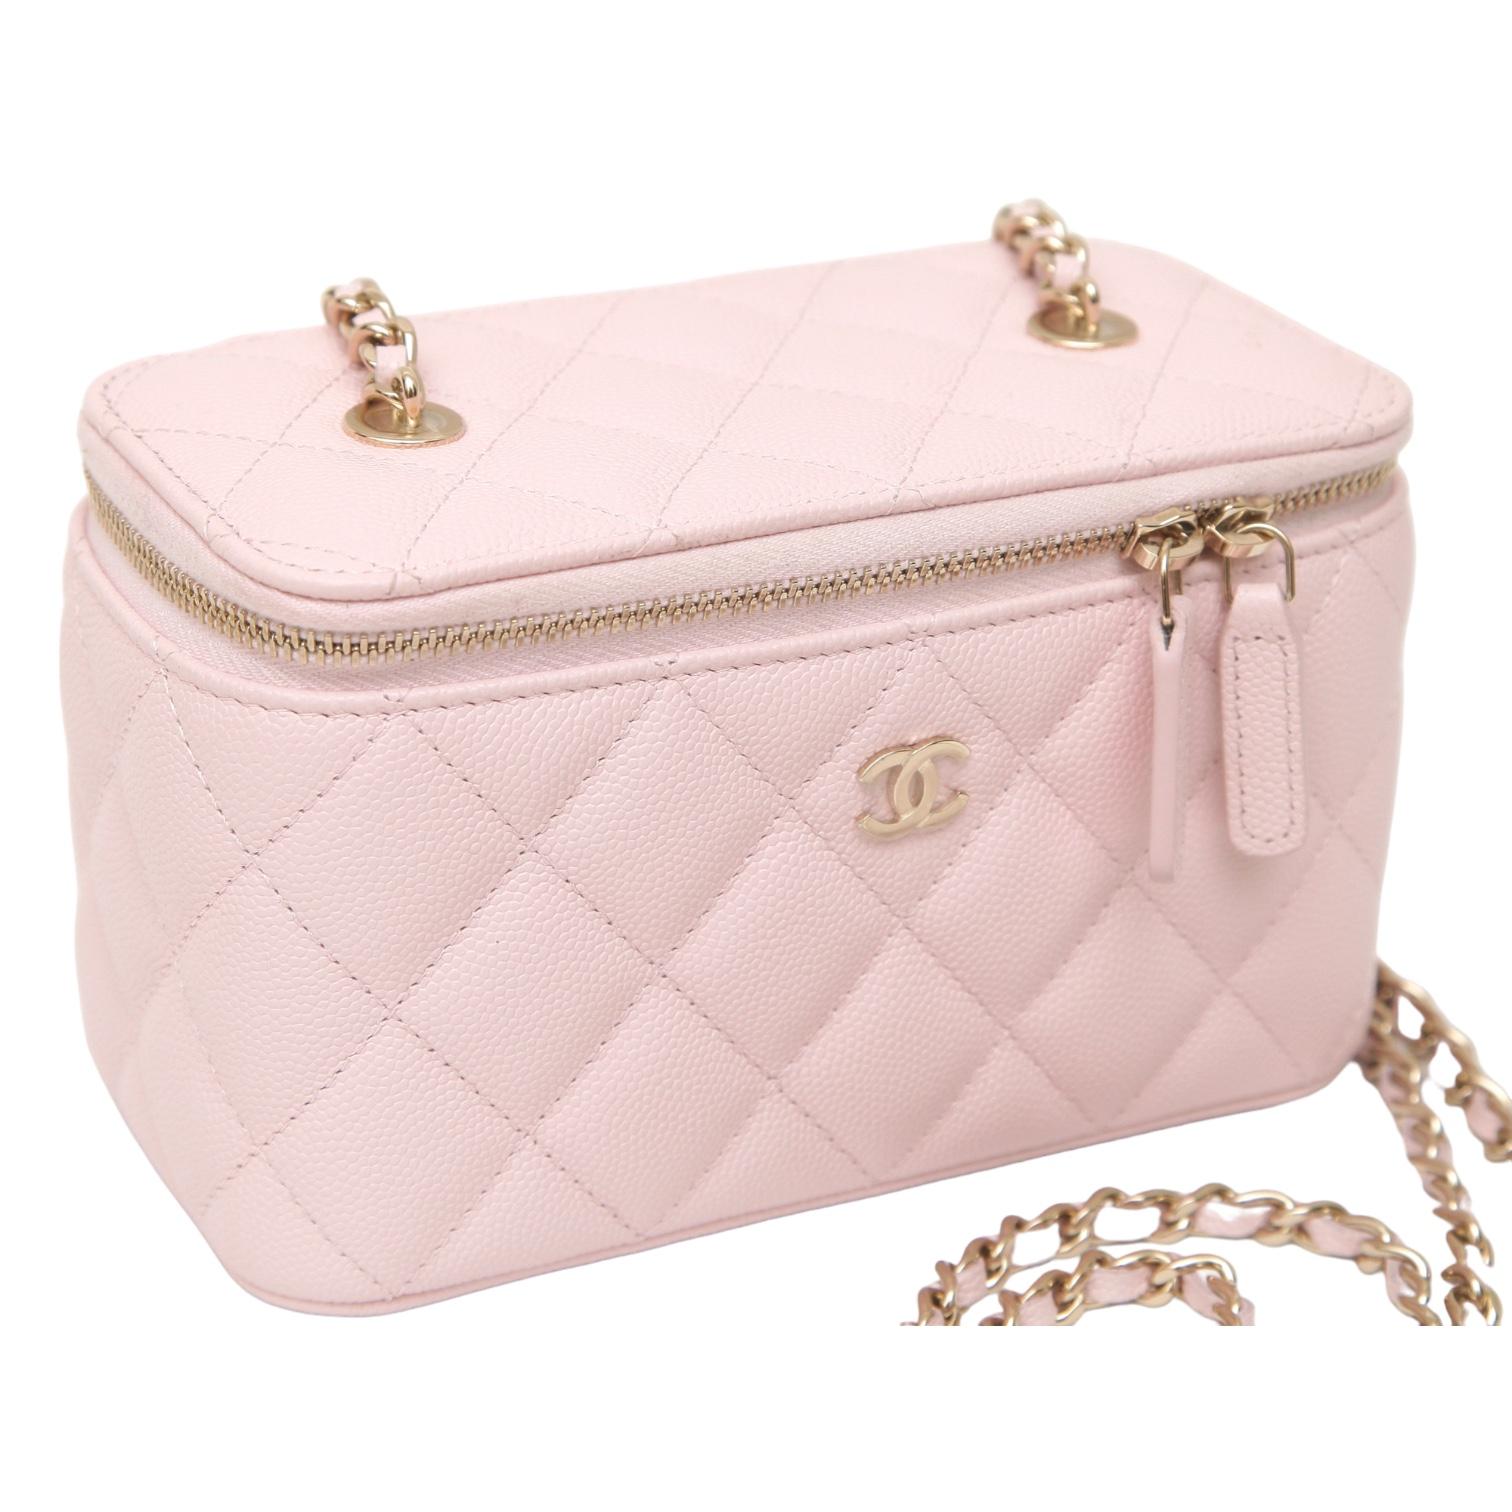  CHANEL Pink Caviar Leather Vanity Bag Case Crossbody Gold HW Light 22S - Video  In Excellent Condition In Hollywood, FL